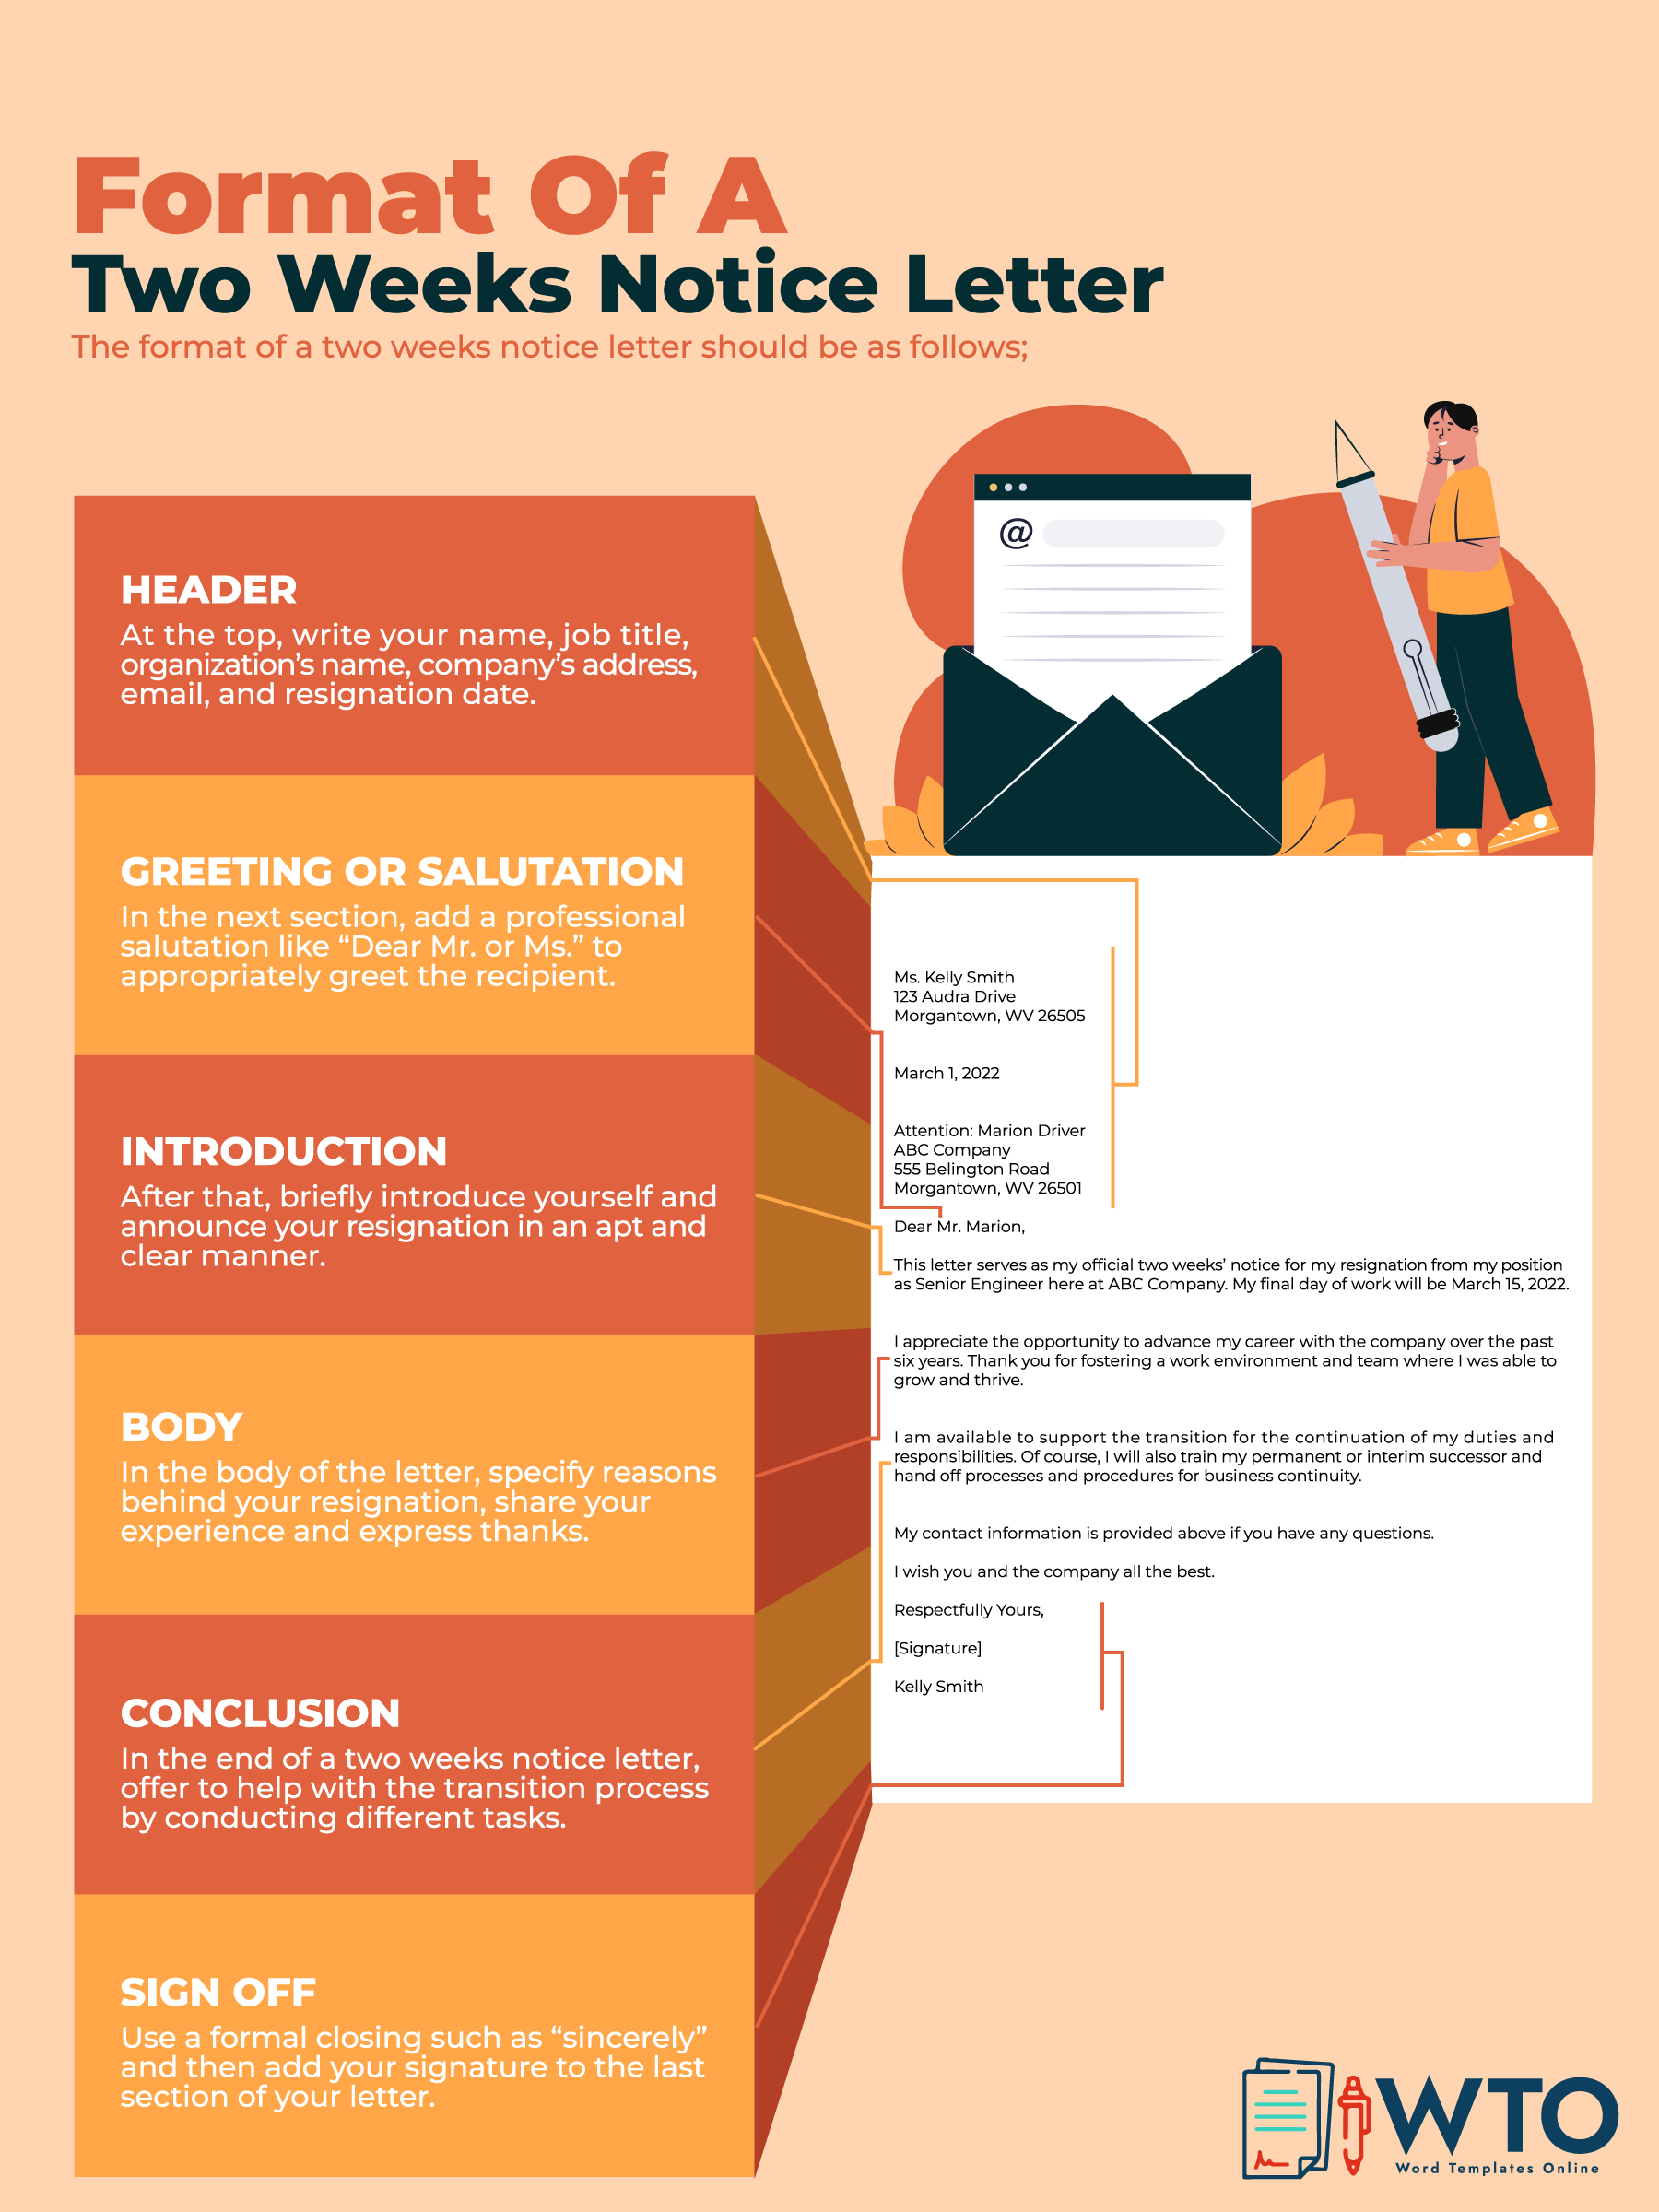 This infographic is about format of two weeks notice letter.